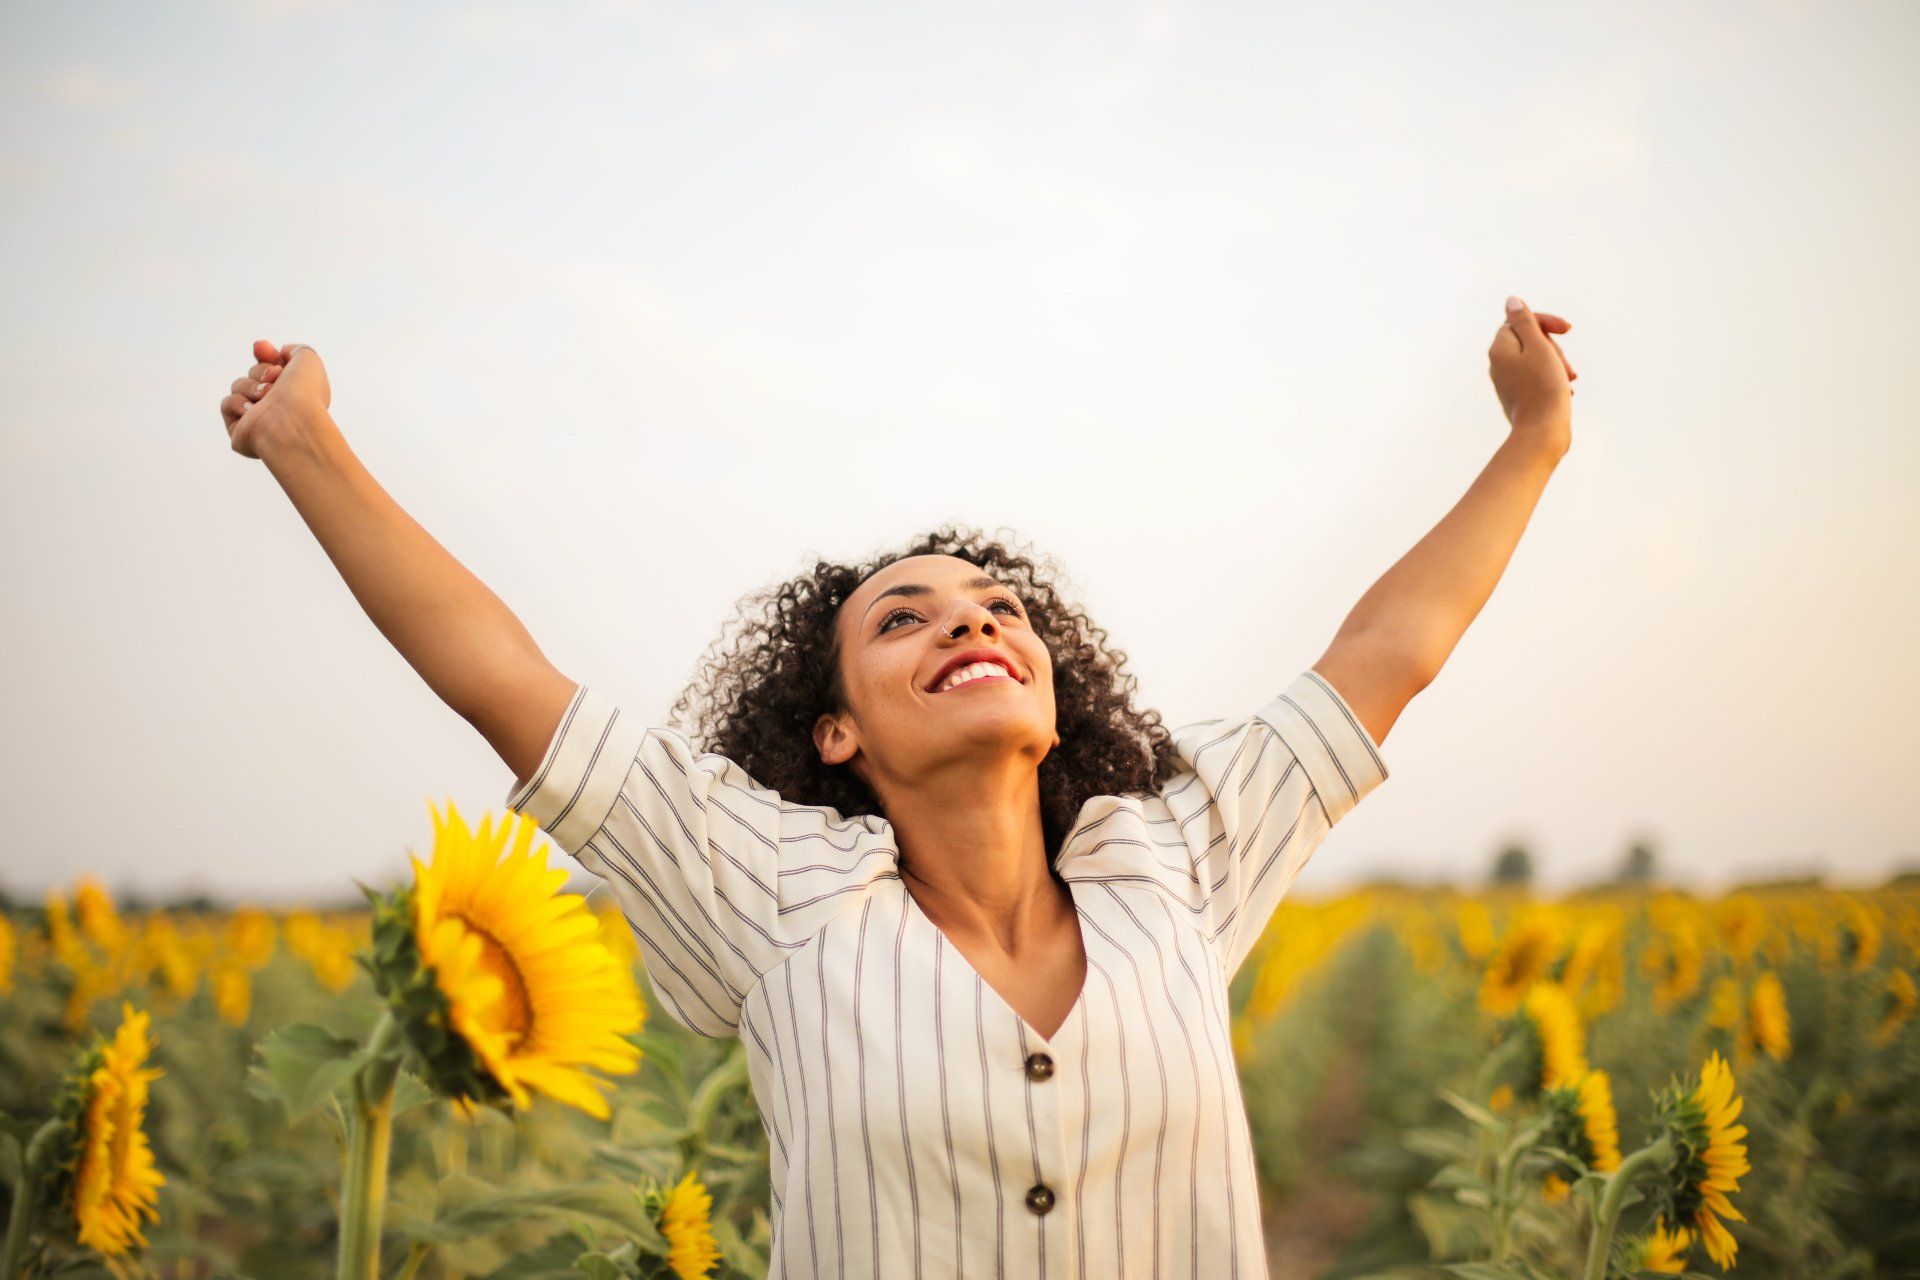 A woman is standing in a field of sunflowers with her arms outstretched.